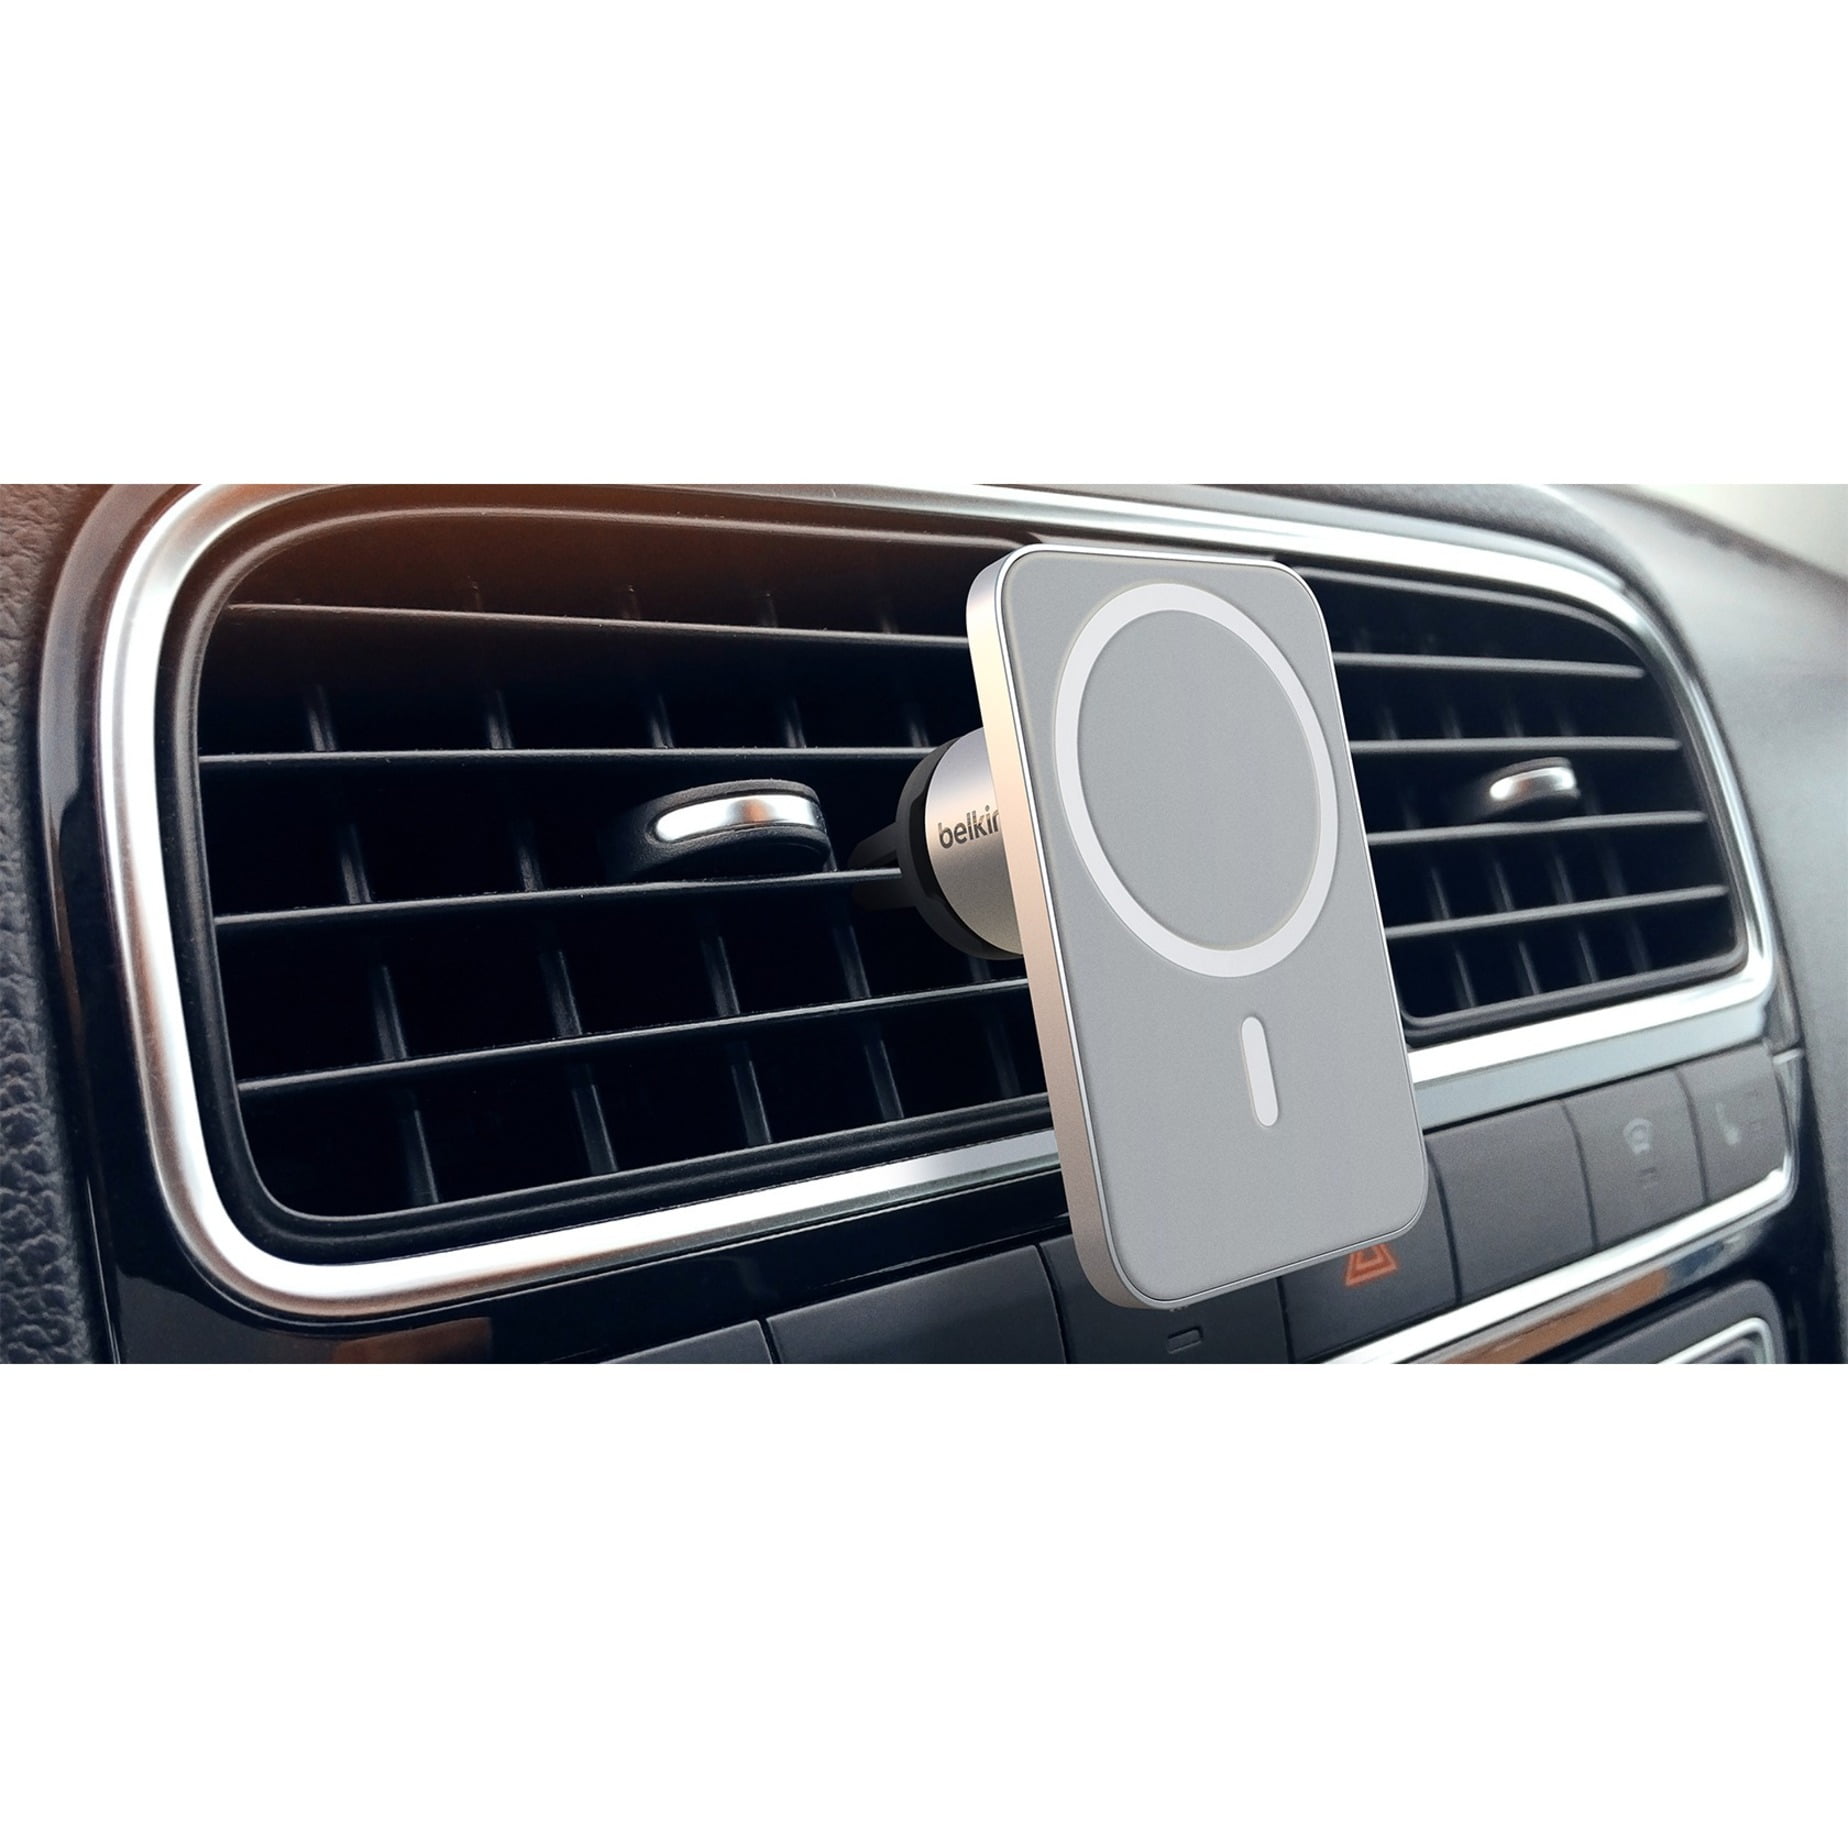 Belkin MagSafe Car Mount debuts with streamlined design - 9to5Toys